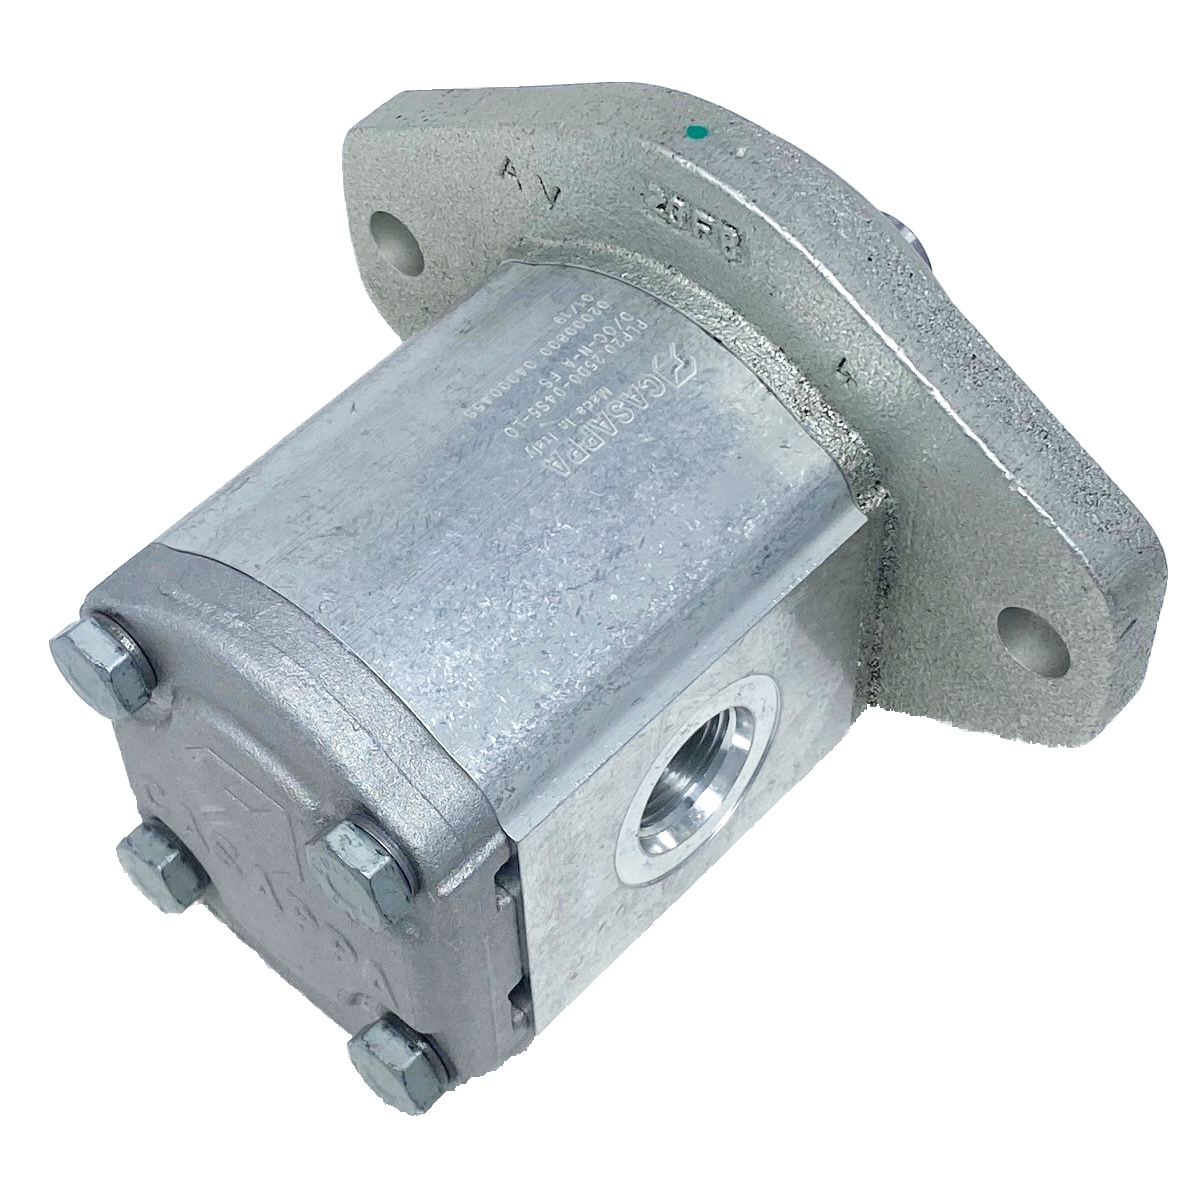 PHM20.27,8R0-32S5-LOC/OG-N-L : Casappa Polaris Gear Motor, 28.21cc, 2900psi, 2500RPM, Reversible, External Drain, 3/4" Bore x 1/4" Key Shaft, SAE B 2-Bolt Flange, 0.625 (5/8") #10 SAE In, 1.25" #20 SAE Out, Cast Iron Body Cast Iron Flange And Cover